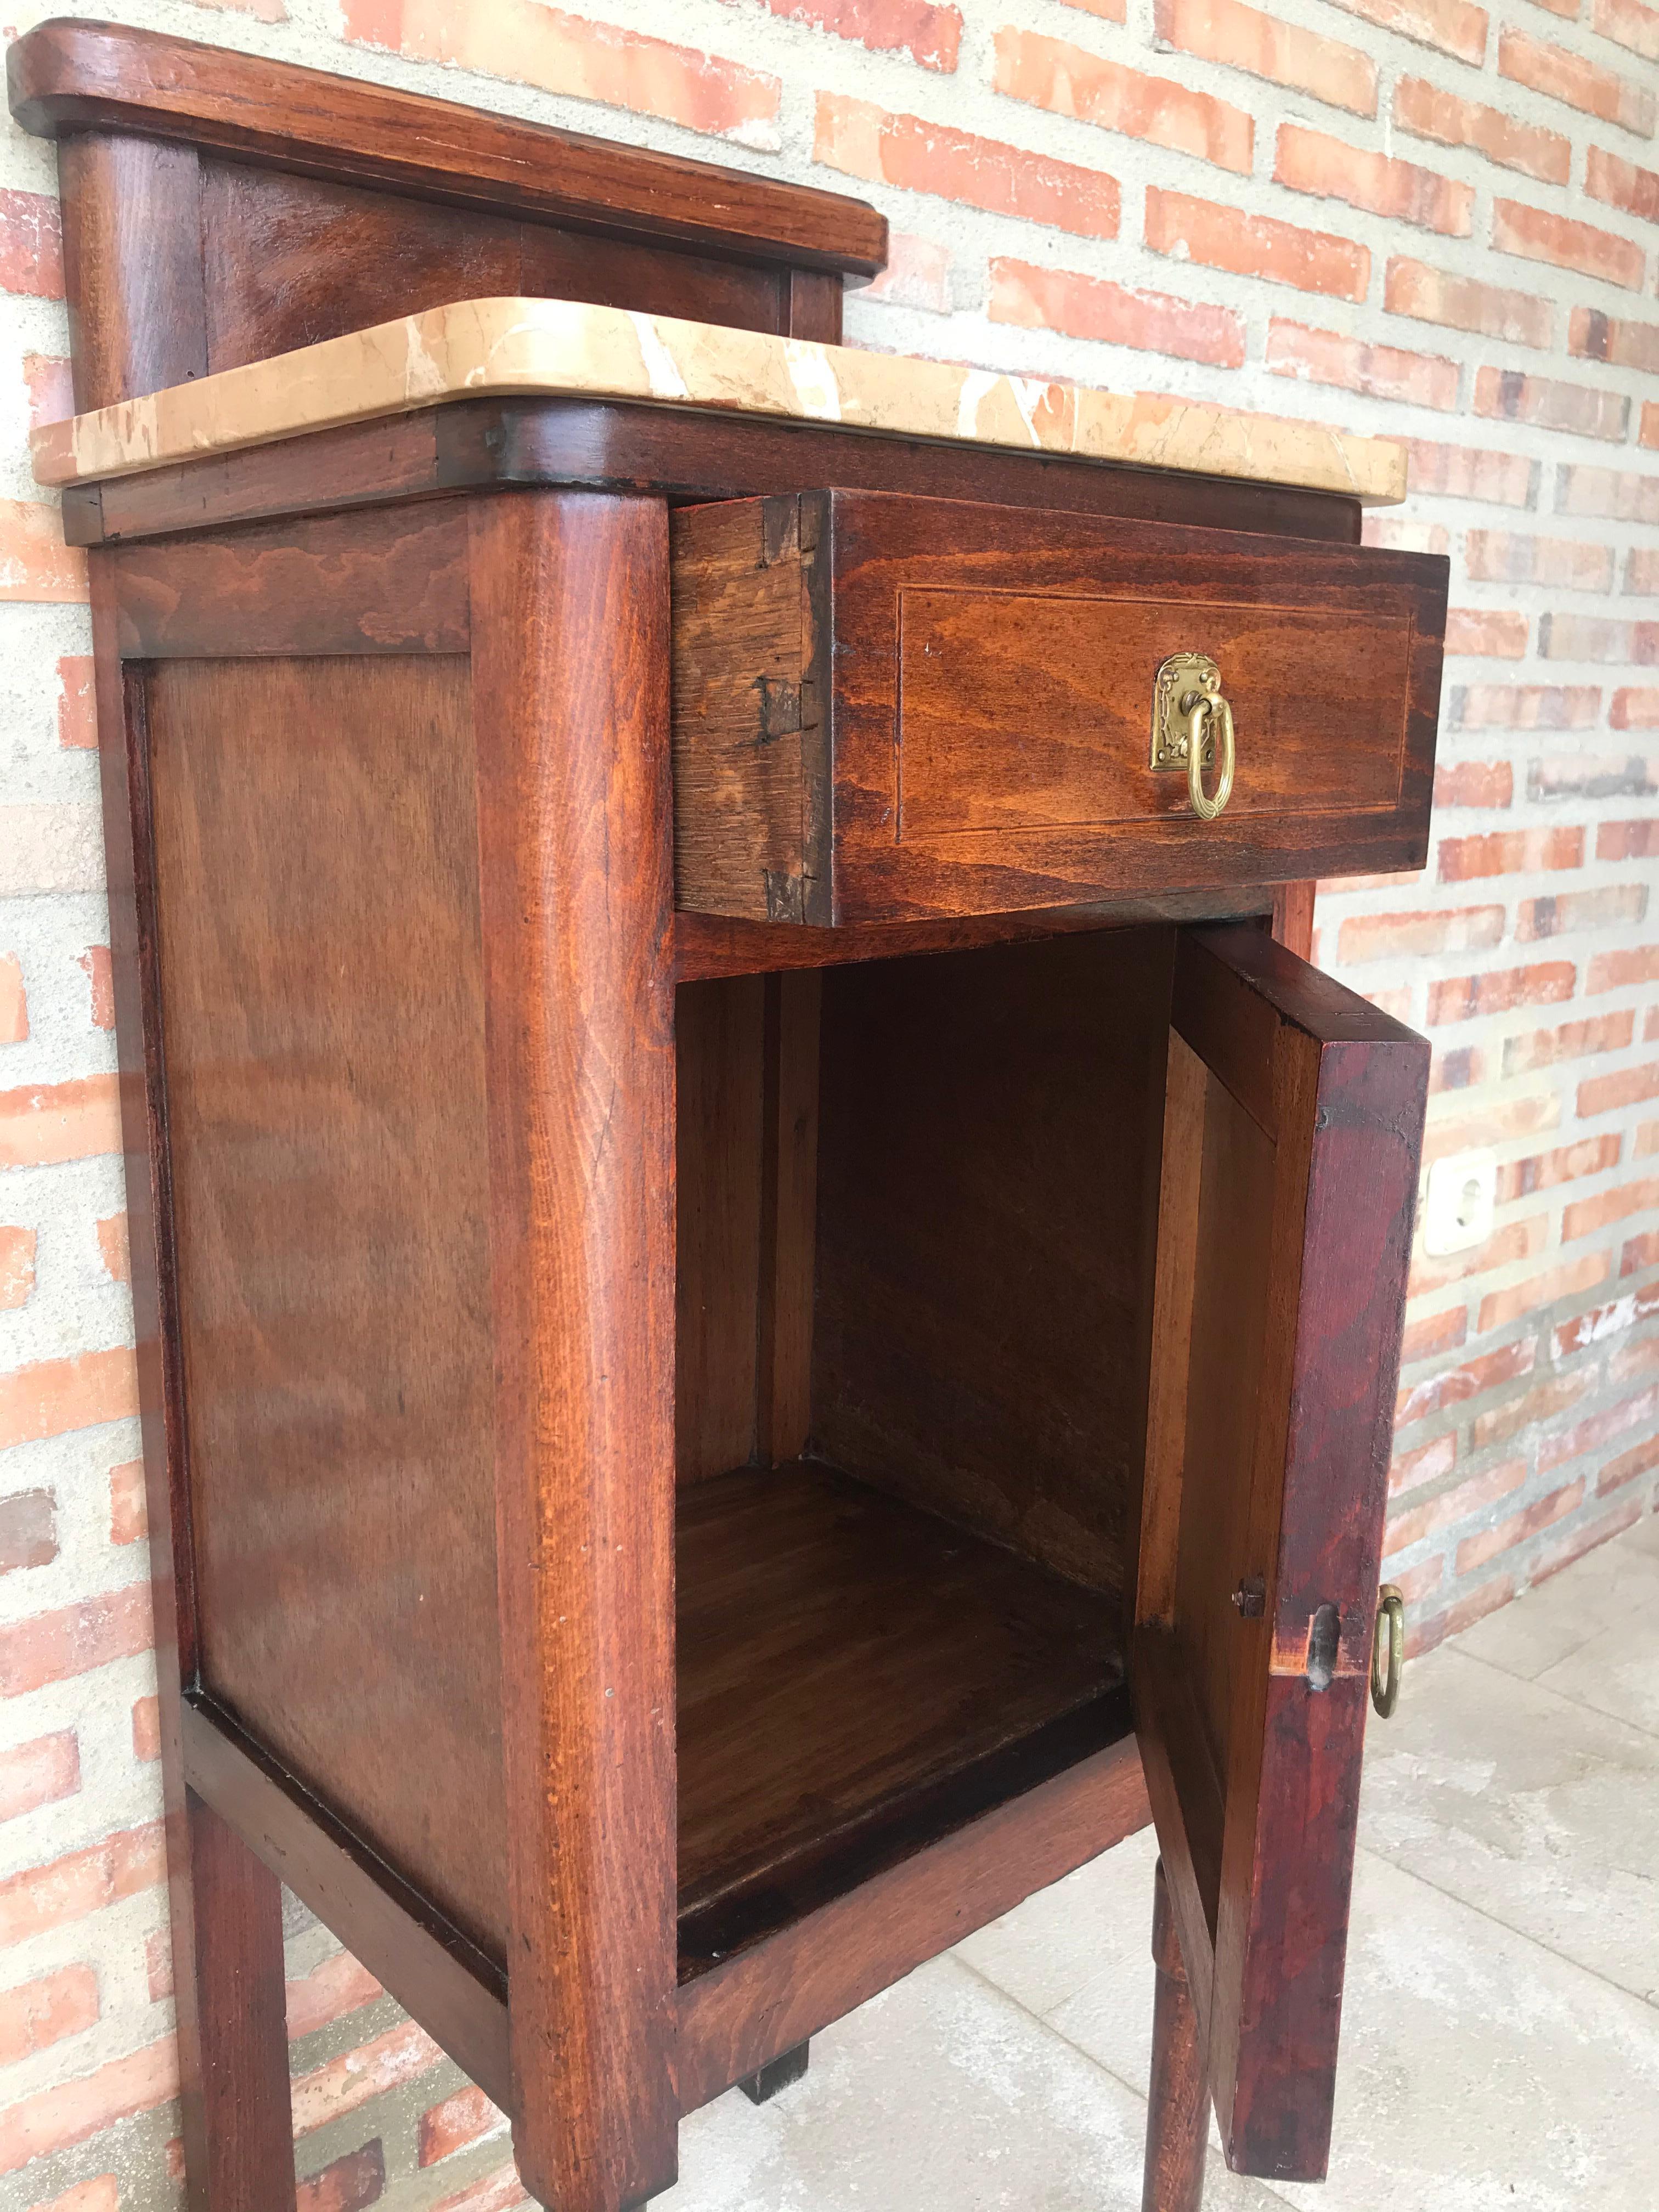 Art Nouveau Walnut Nightstand with Crest, Marble Top and Glass Shelve In Good Condition For Sale In Miami, FL